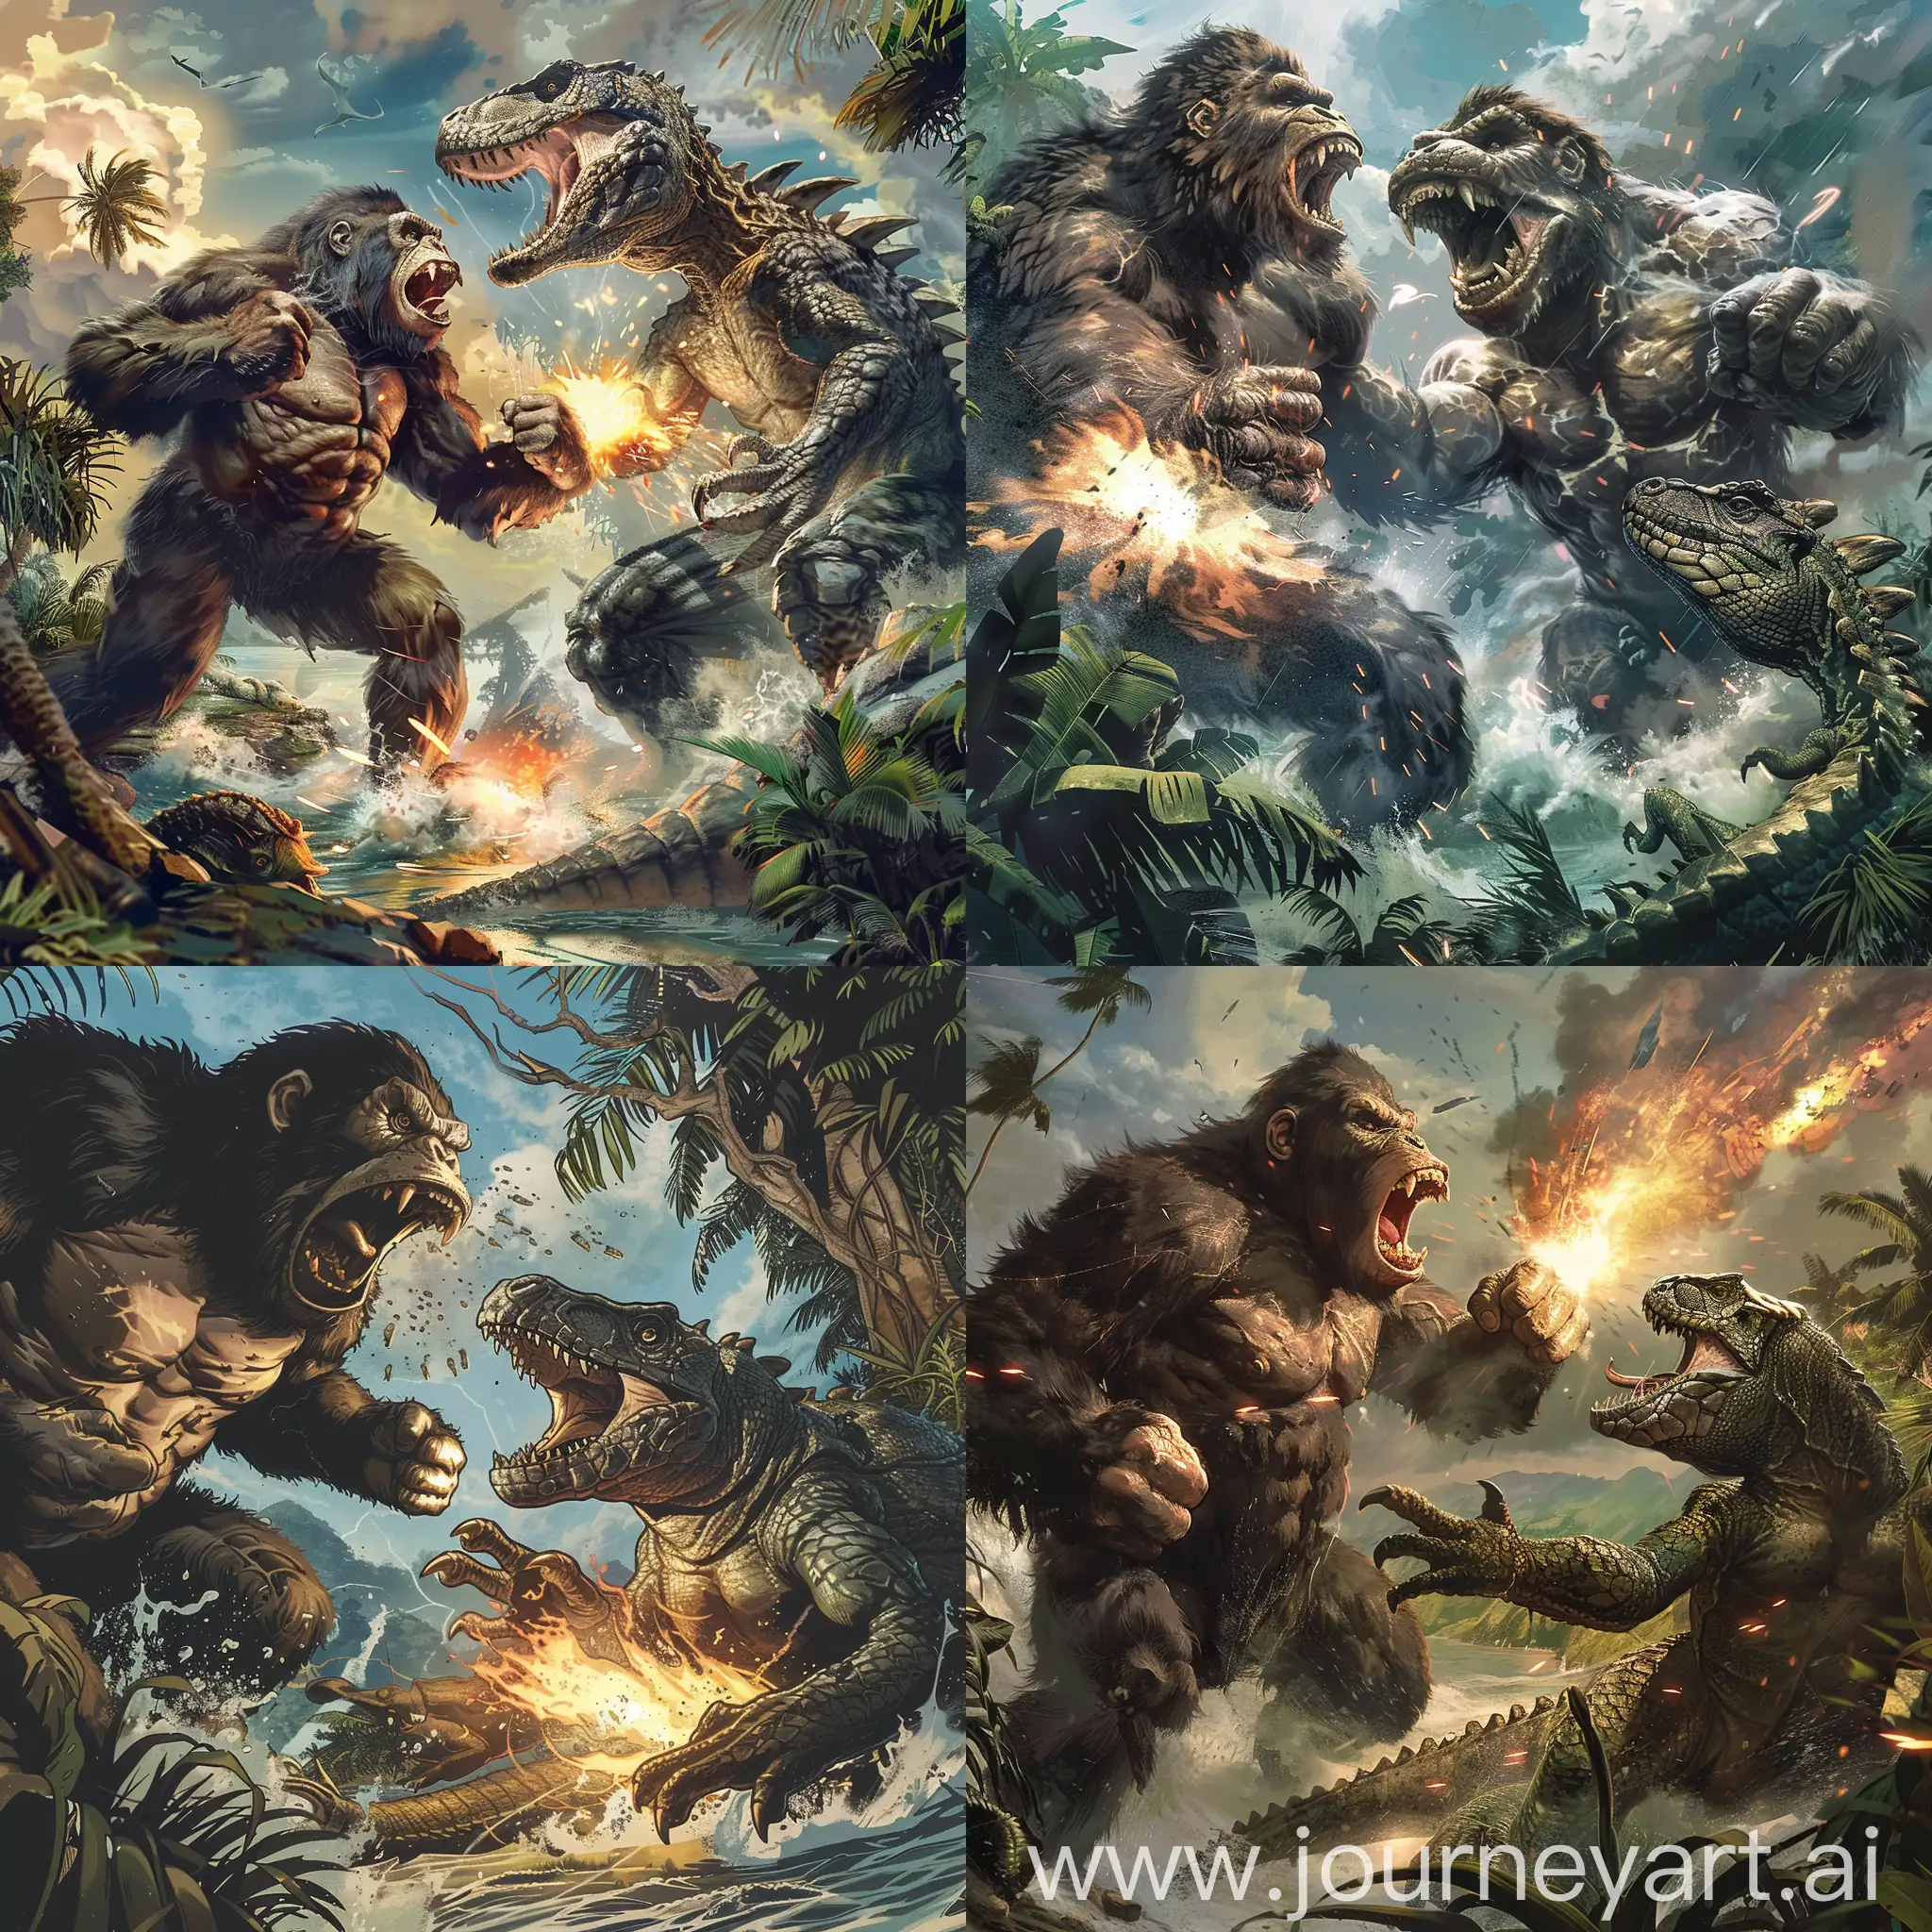 A deafening roar echoes across the island, as a gigantic ape rears back, its fists clenched and muscles tensed. Facing it is a behemoth reptilian monster, its jaws agape, unleashing a searing torrent of atomic breath that scorches the surrounding vegetation. The two titans lunge towards each other, their immense forms colliding in a earth-shattering clash